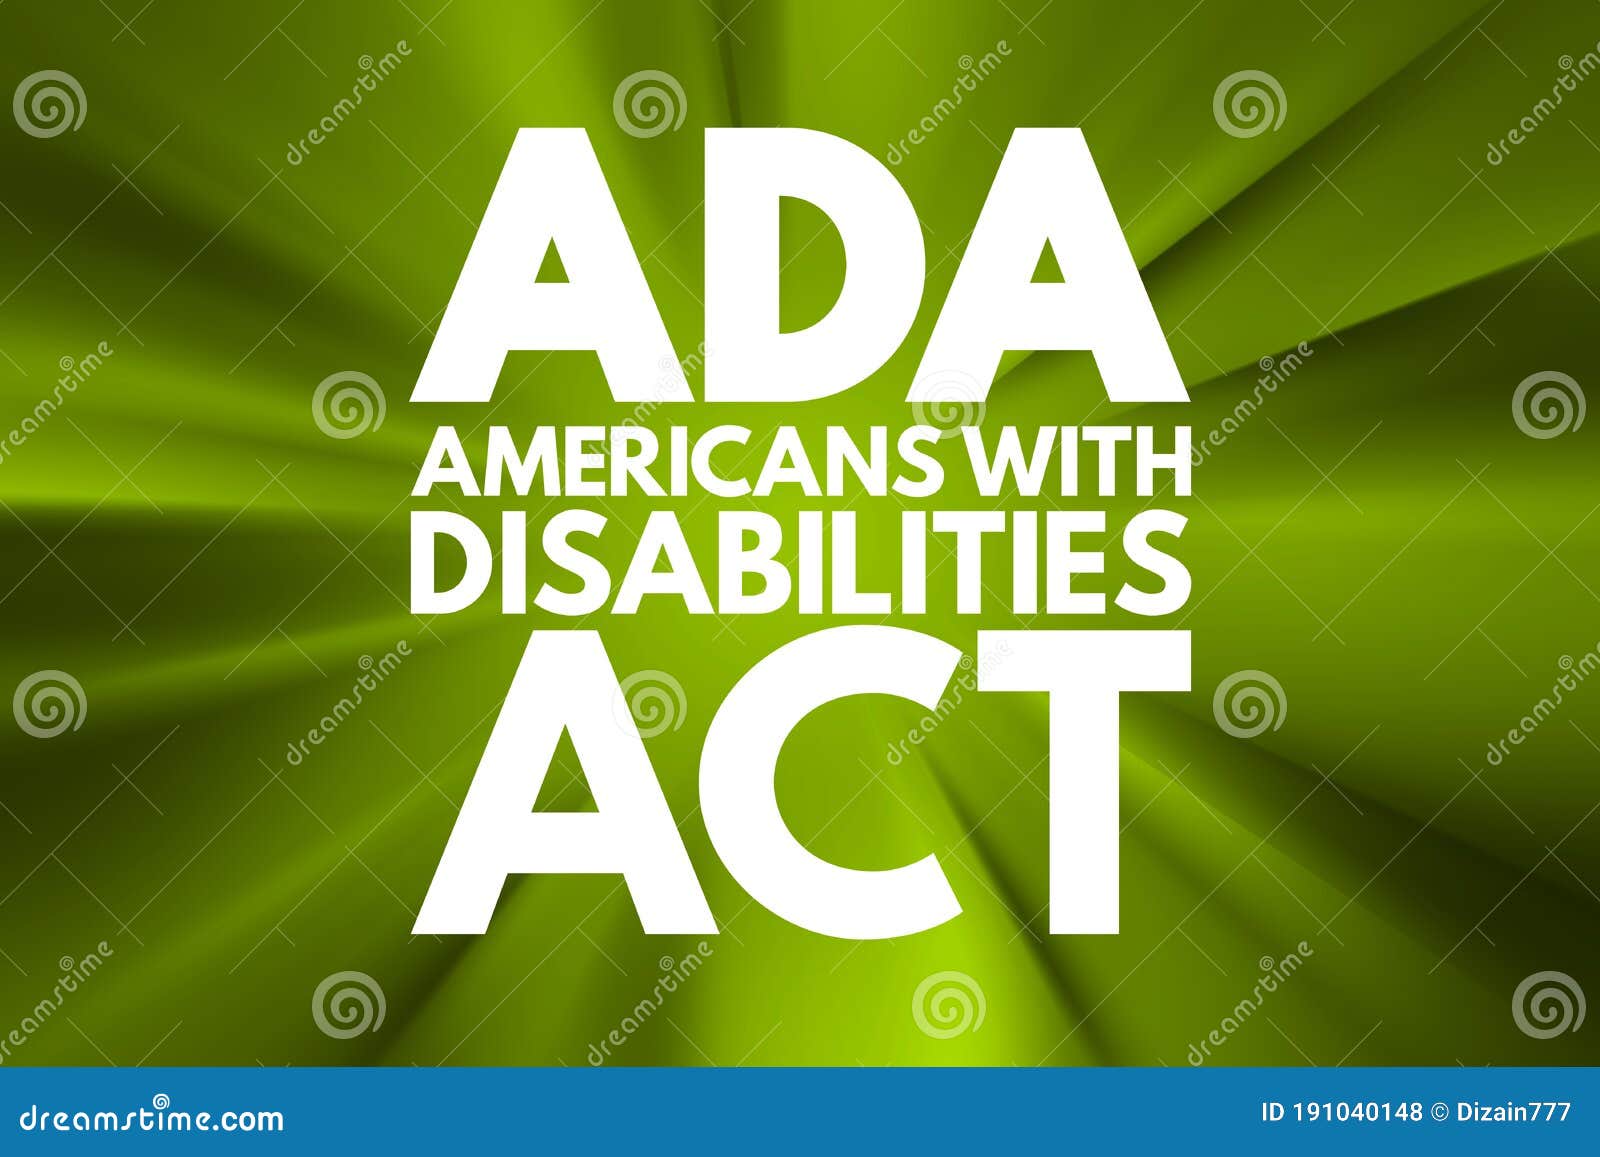 ada - americans with disabilities act acronym, concept background